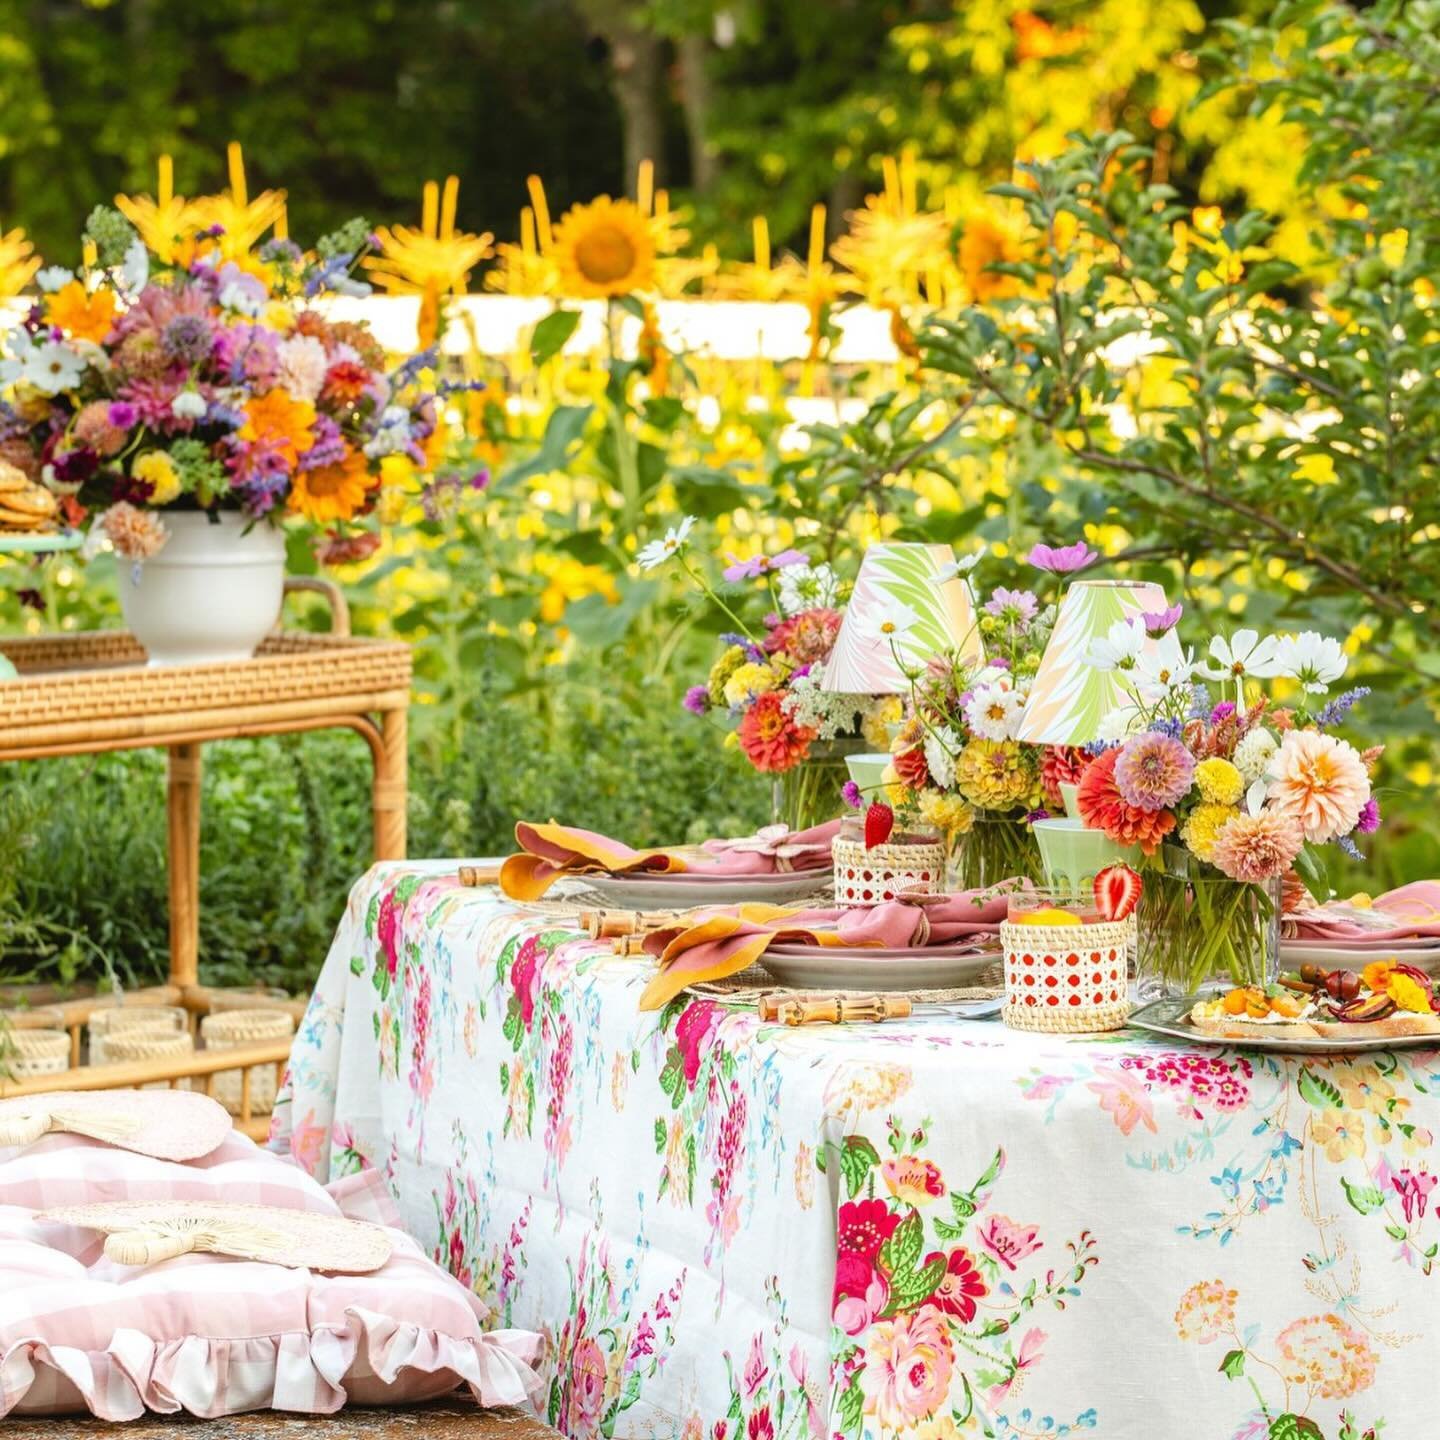 Rounding out the feed with a few more images from the dining area of our game-day ladies luncheon for @flowermagazine. These pictures make me look forward to soaking up the sun this summer and entertaining outdoors. Have a great weekend friends! 💛☀️